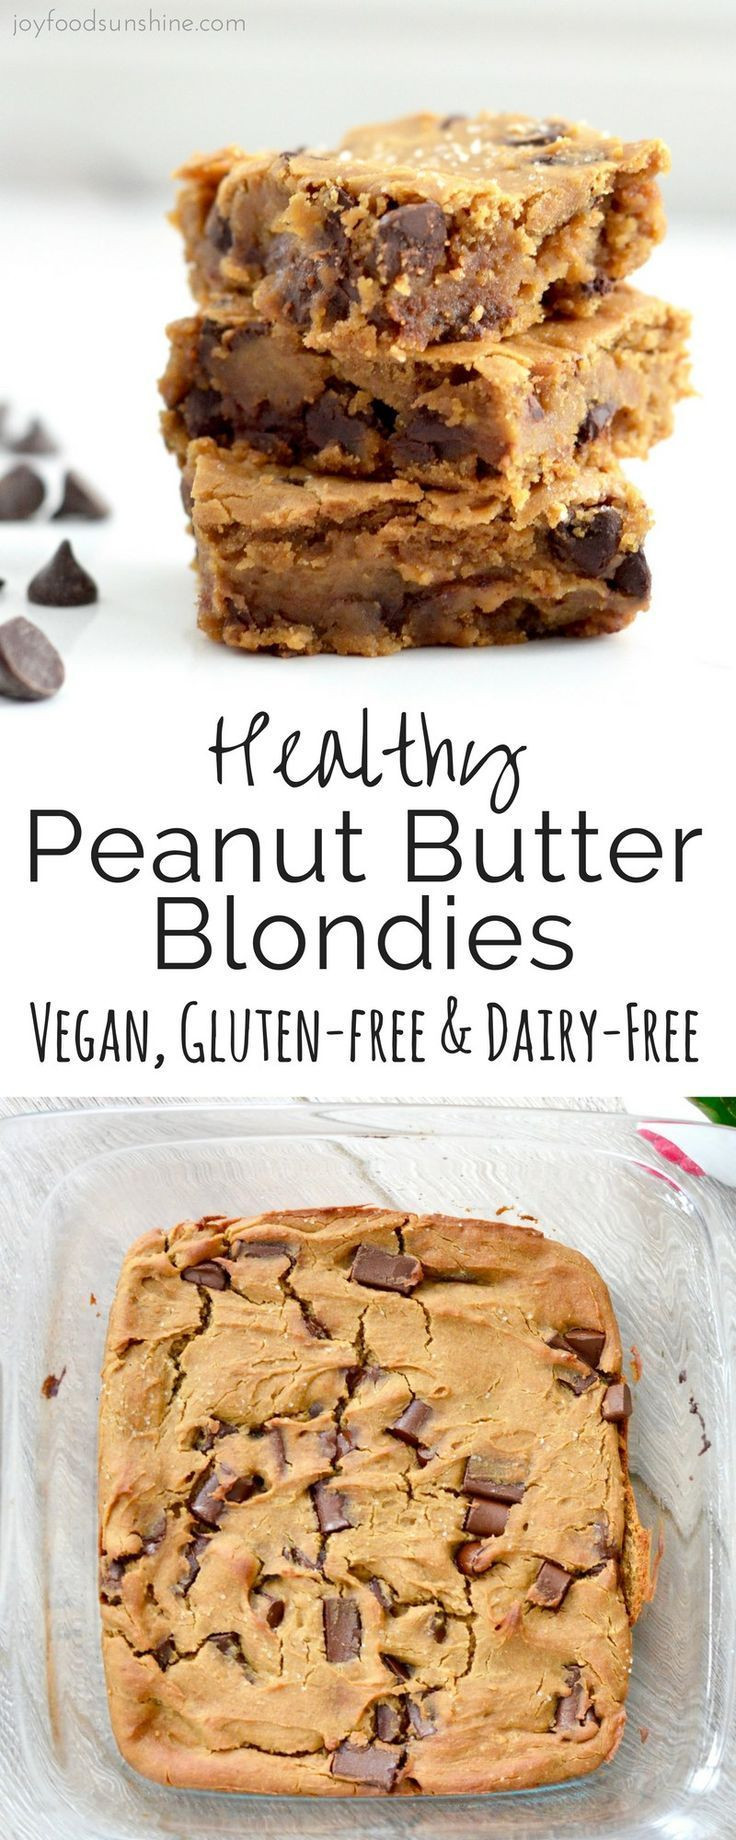 Gluten Free Dairy Free Nut Free Desserts
 1000 images about Vegan Foods on Pinterest